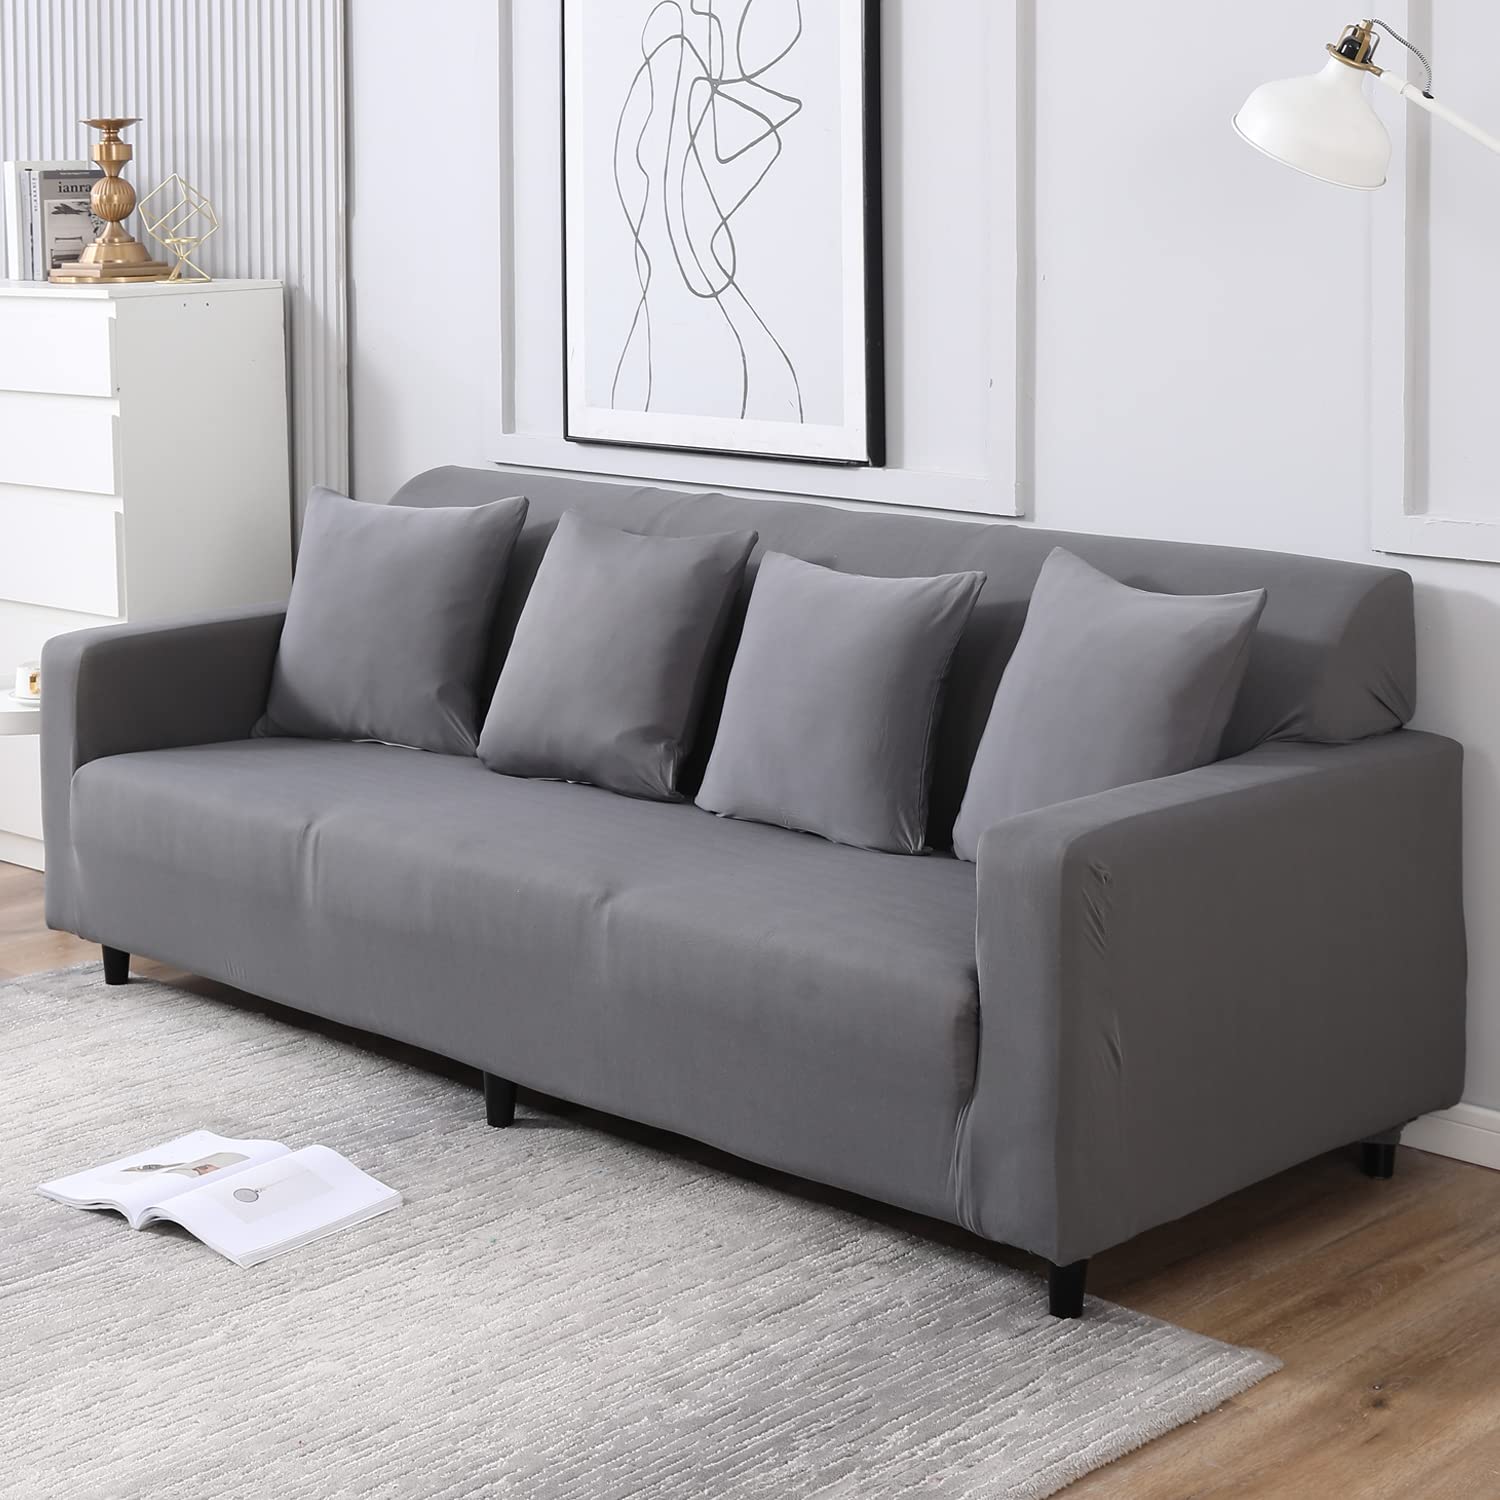 (Net) Revamp Your Living Space with our 3-Seat Sofa Cover / 917883